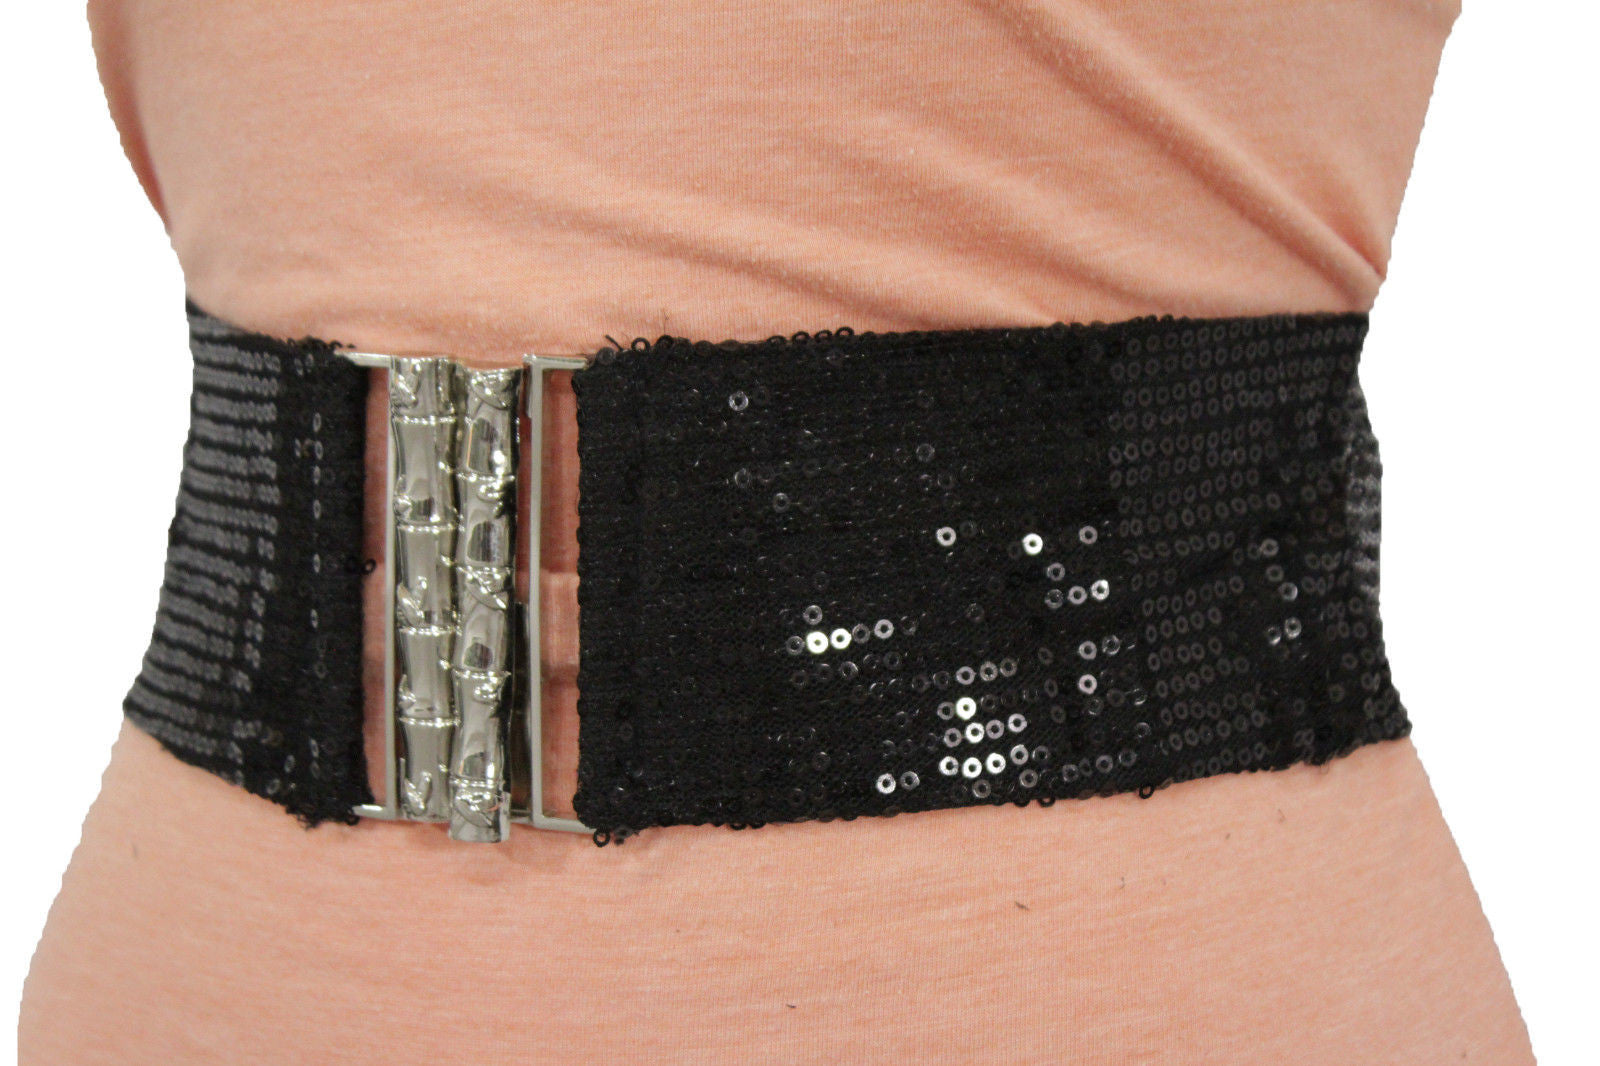 Hot Black Stretch Fabric Sequins Dressy Belt Big Silver Metal Bamboo Buckle Women XS S M - alwaystyle4you - 1